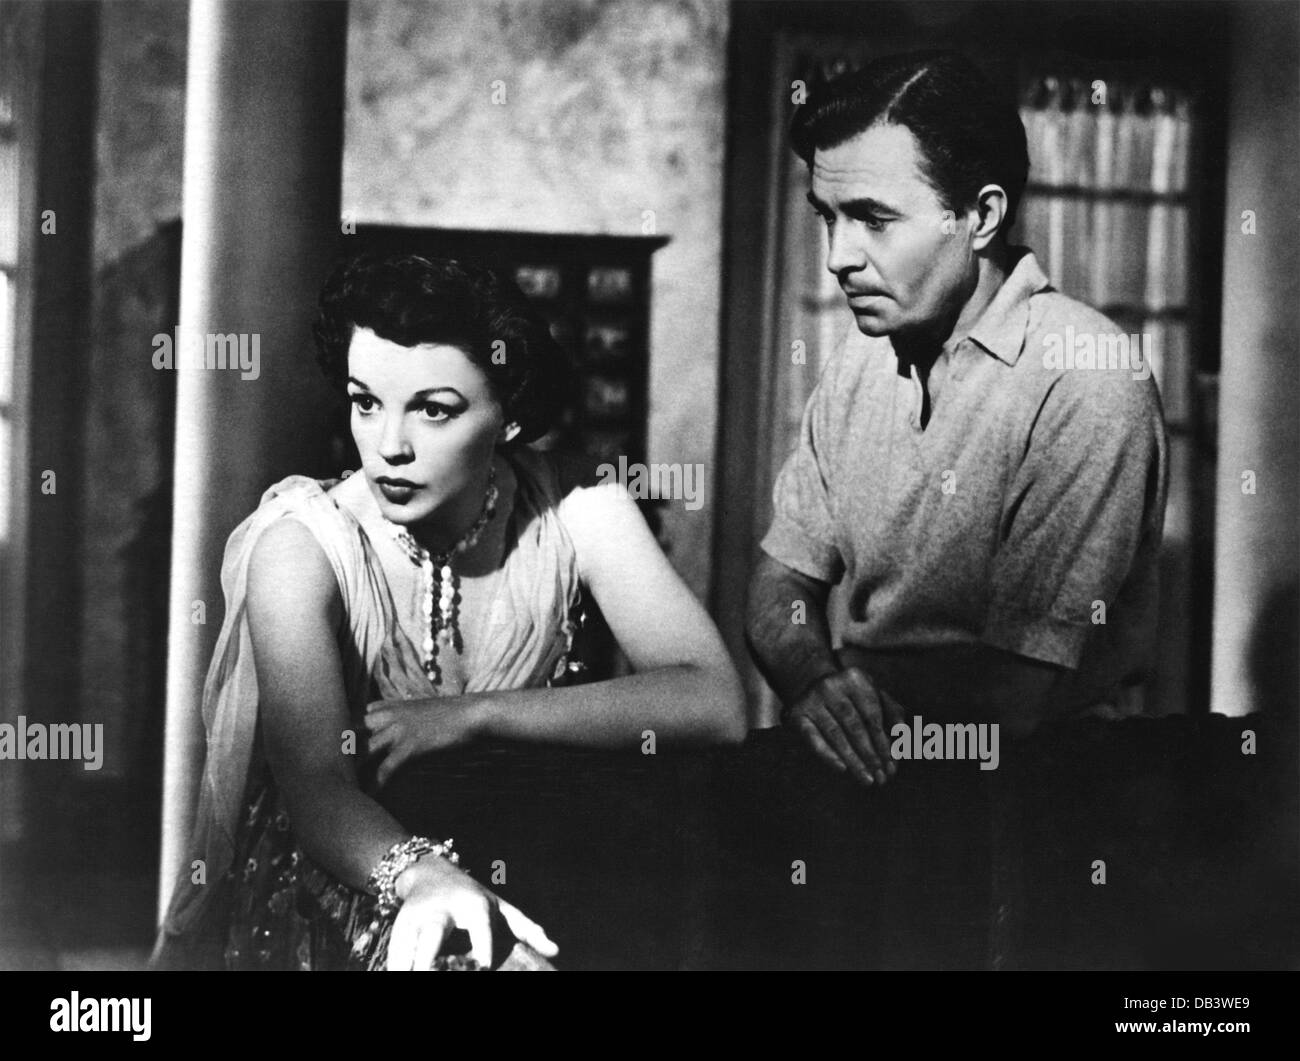 A STAR IS BORN Warner Bros., 1954. Directed by George Cukor. With Judy Garland, James Mason, Stock Photo